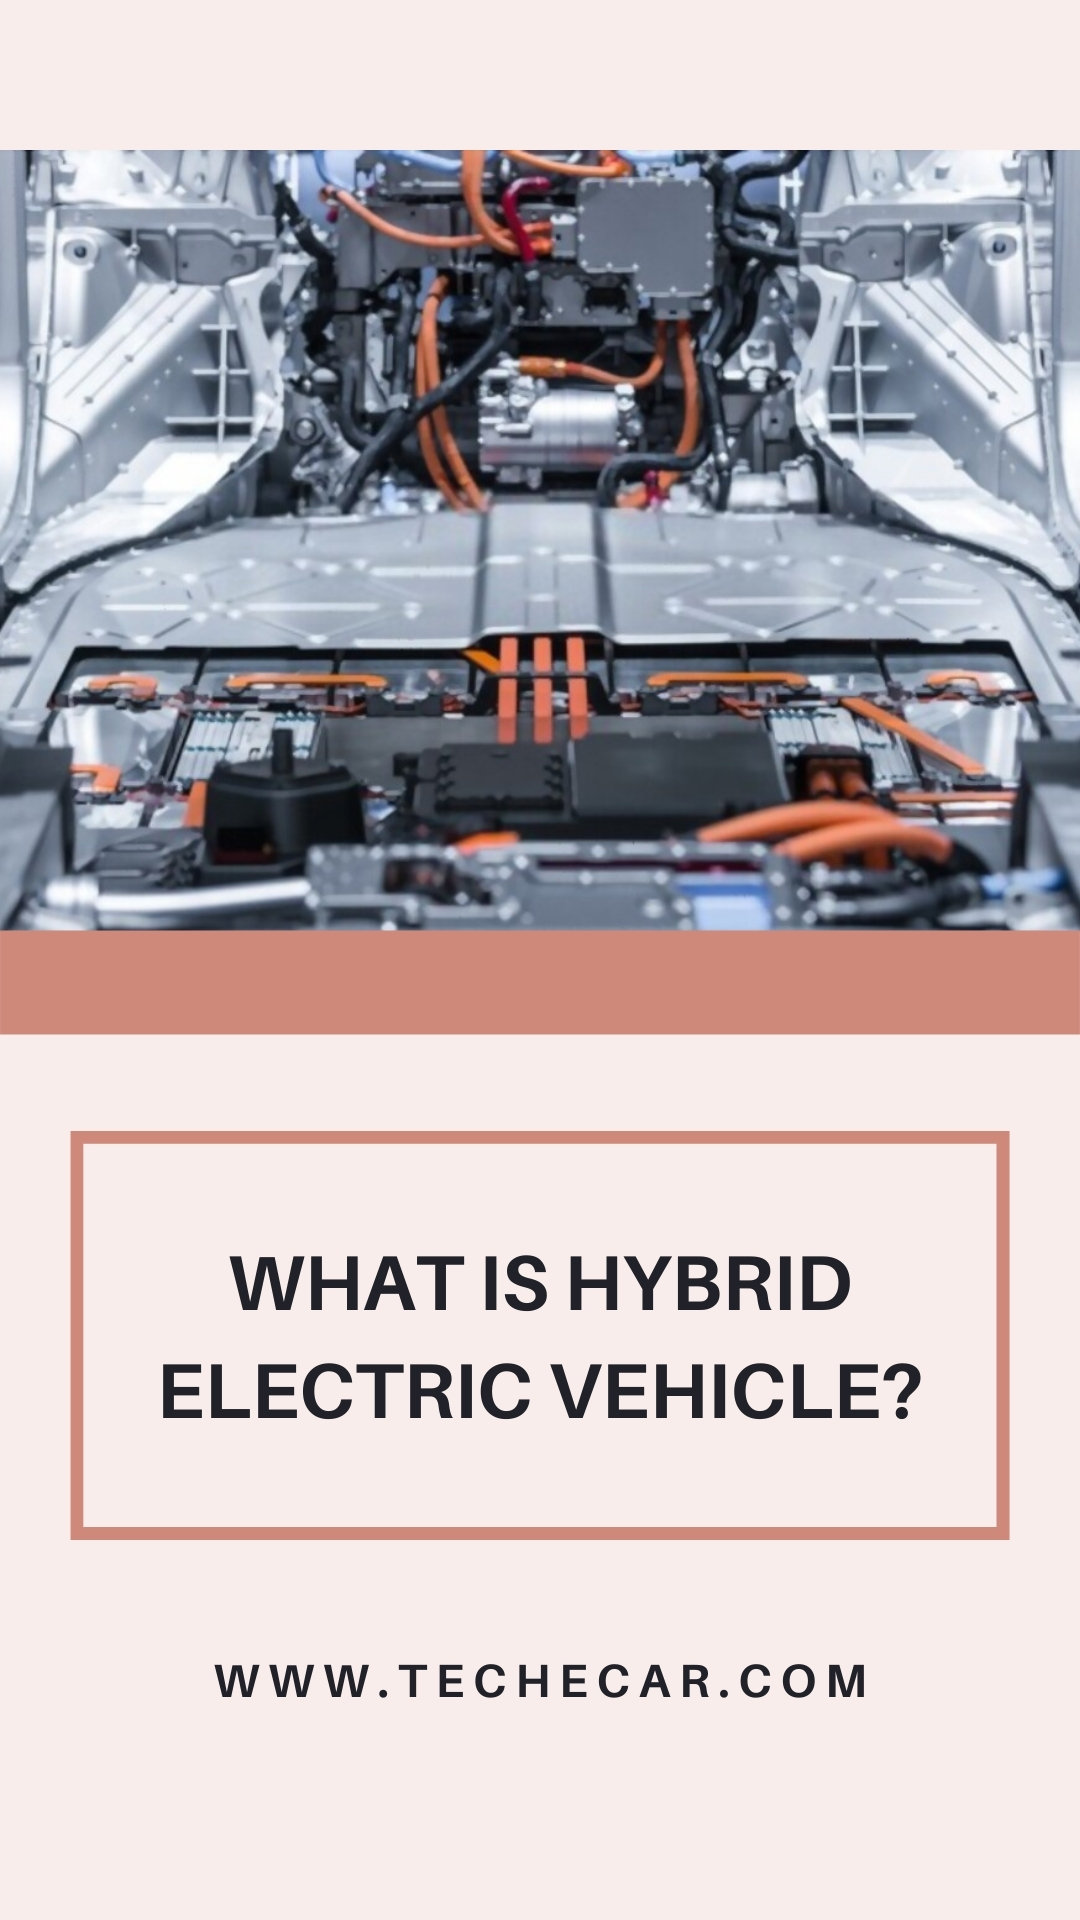 What Is Hybrid Electric Vehicle?